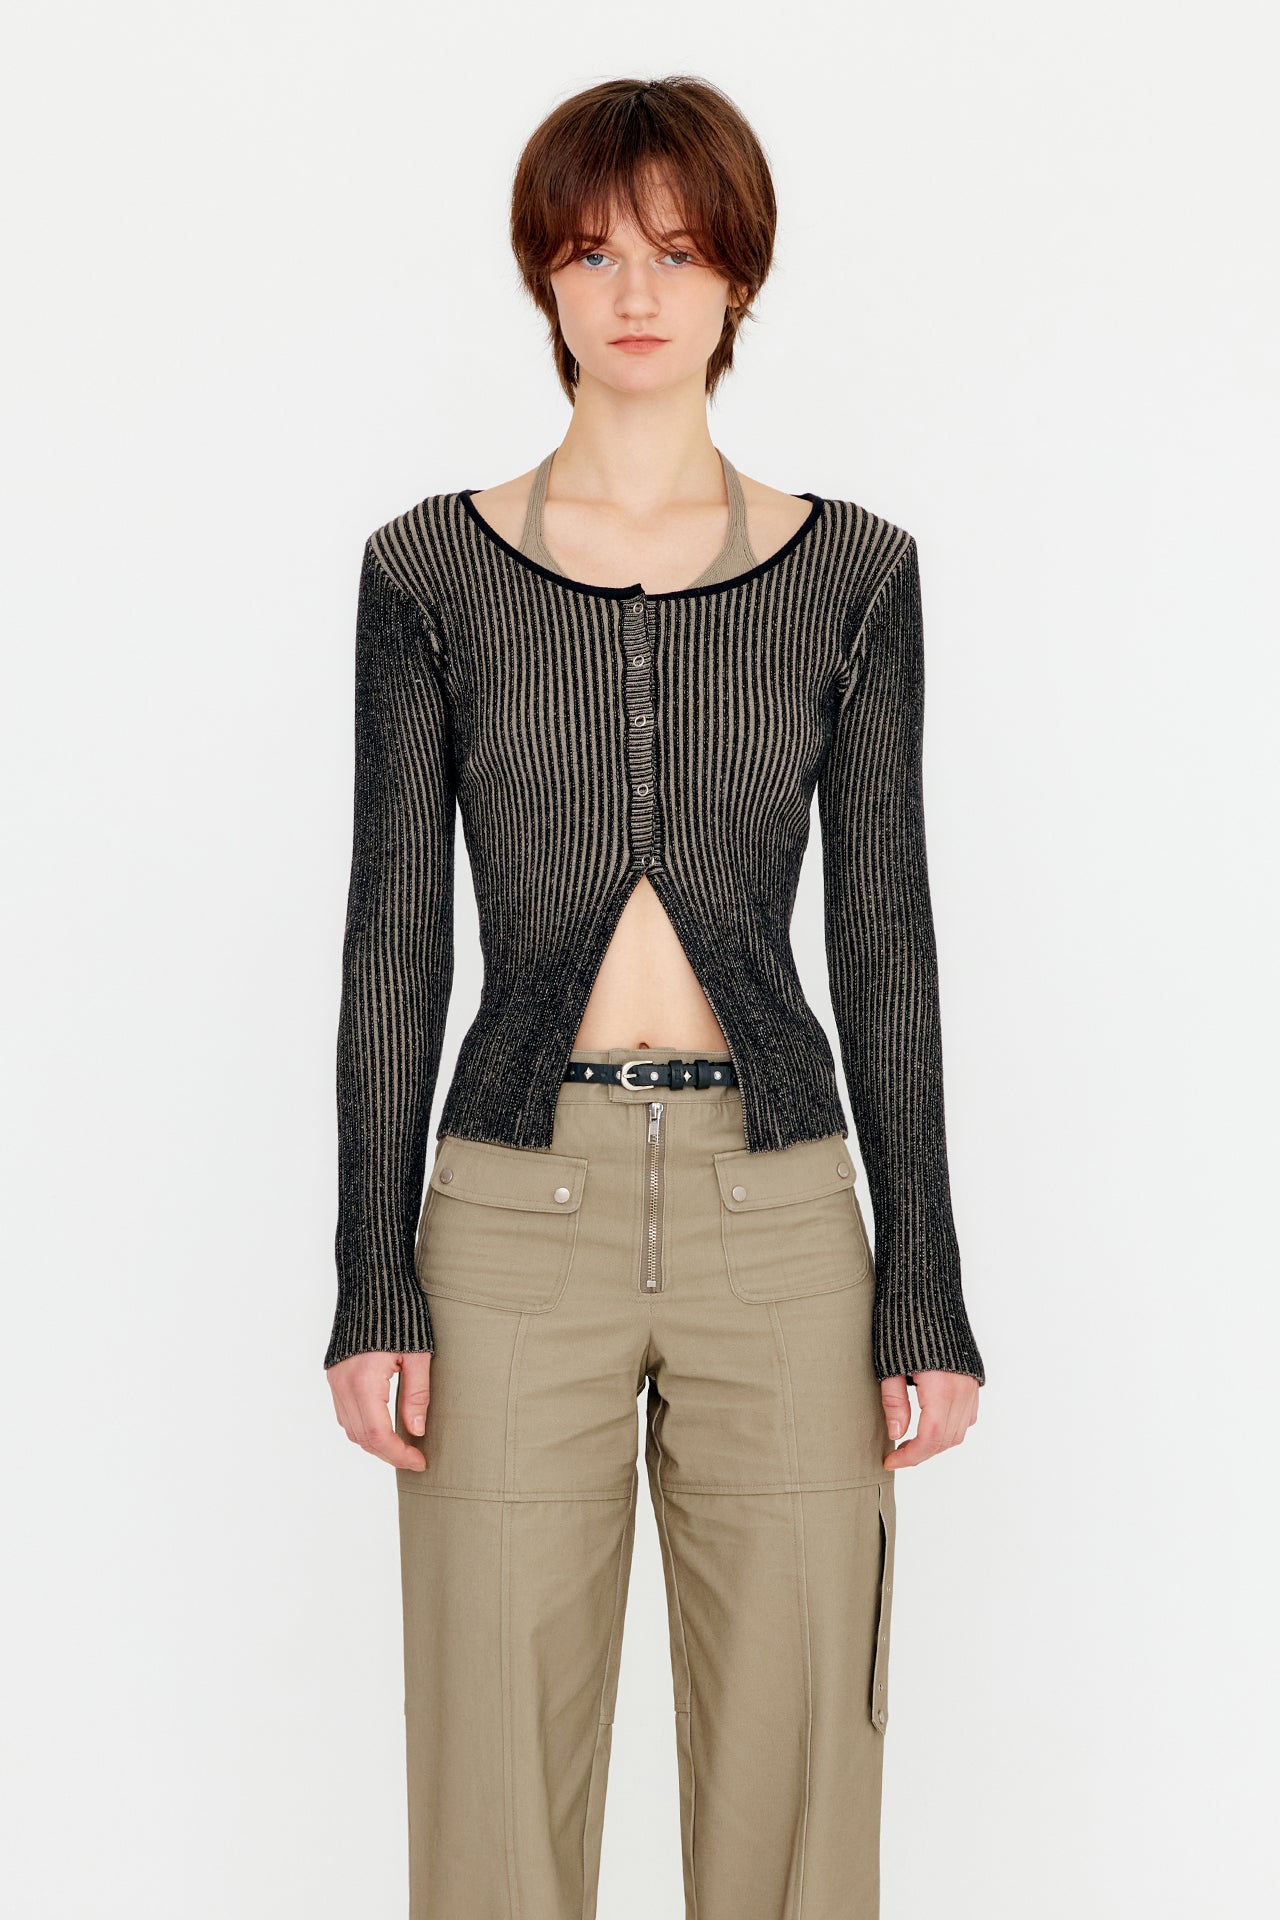 Yuse Two Tone Halter Sleeve Layered Knit Top [Black]